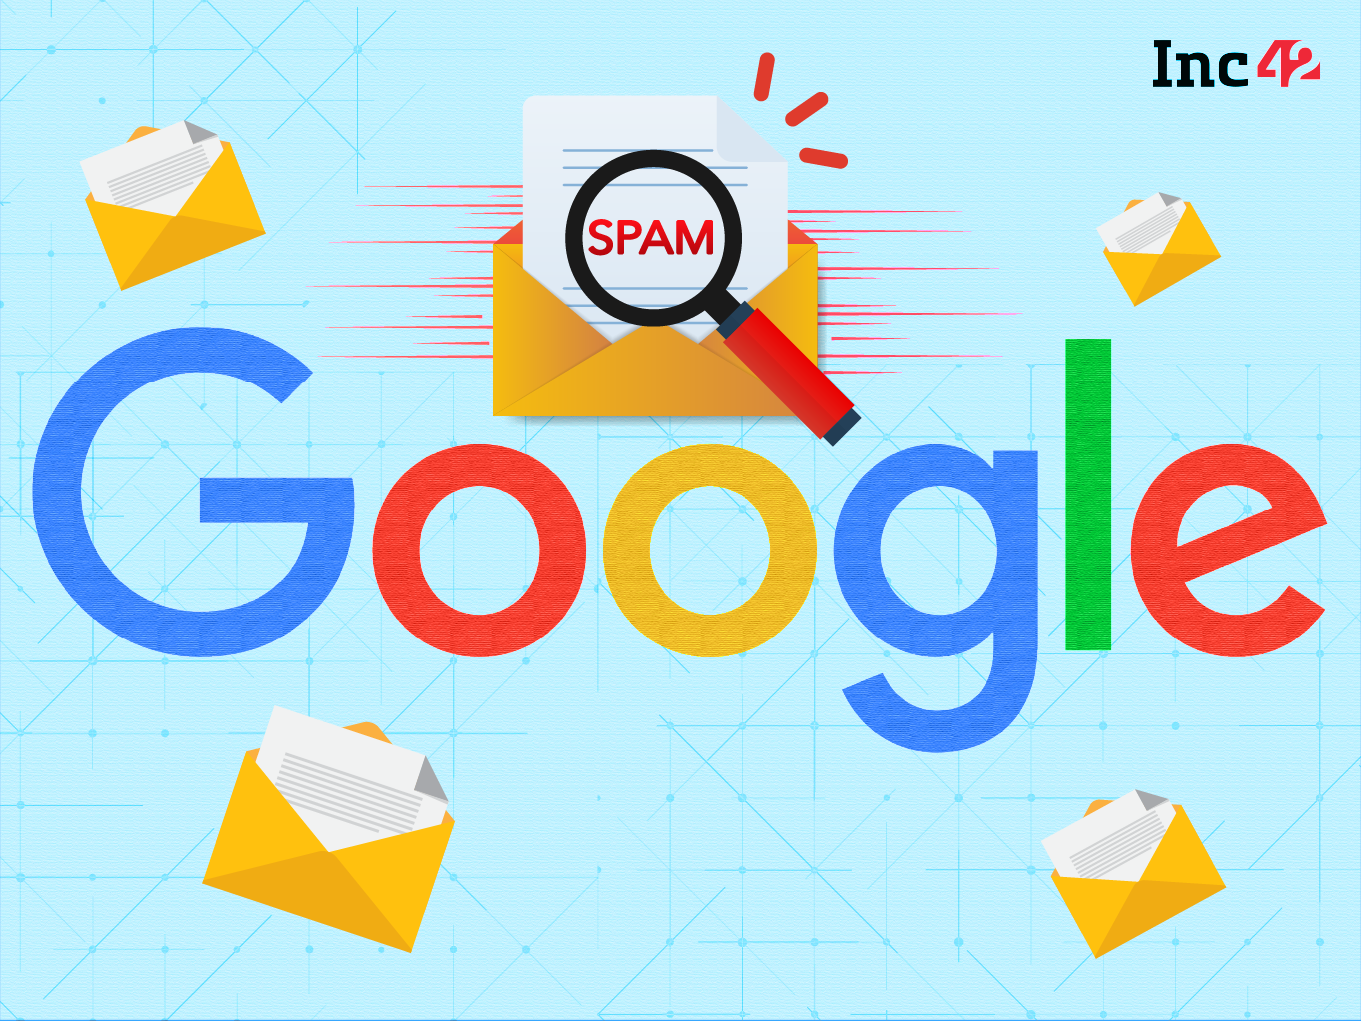 Will Google Restart RCS For Businesses In India With Stricter Rules To Curb Spamming?